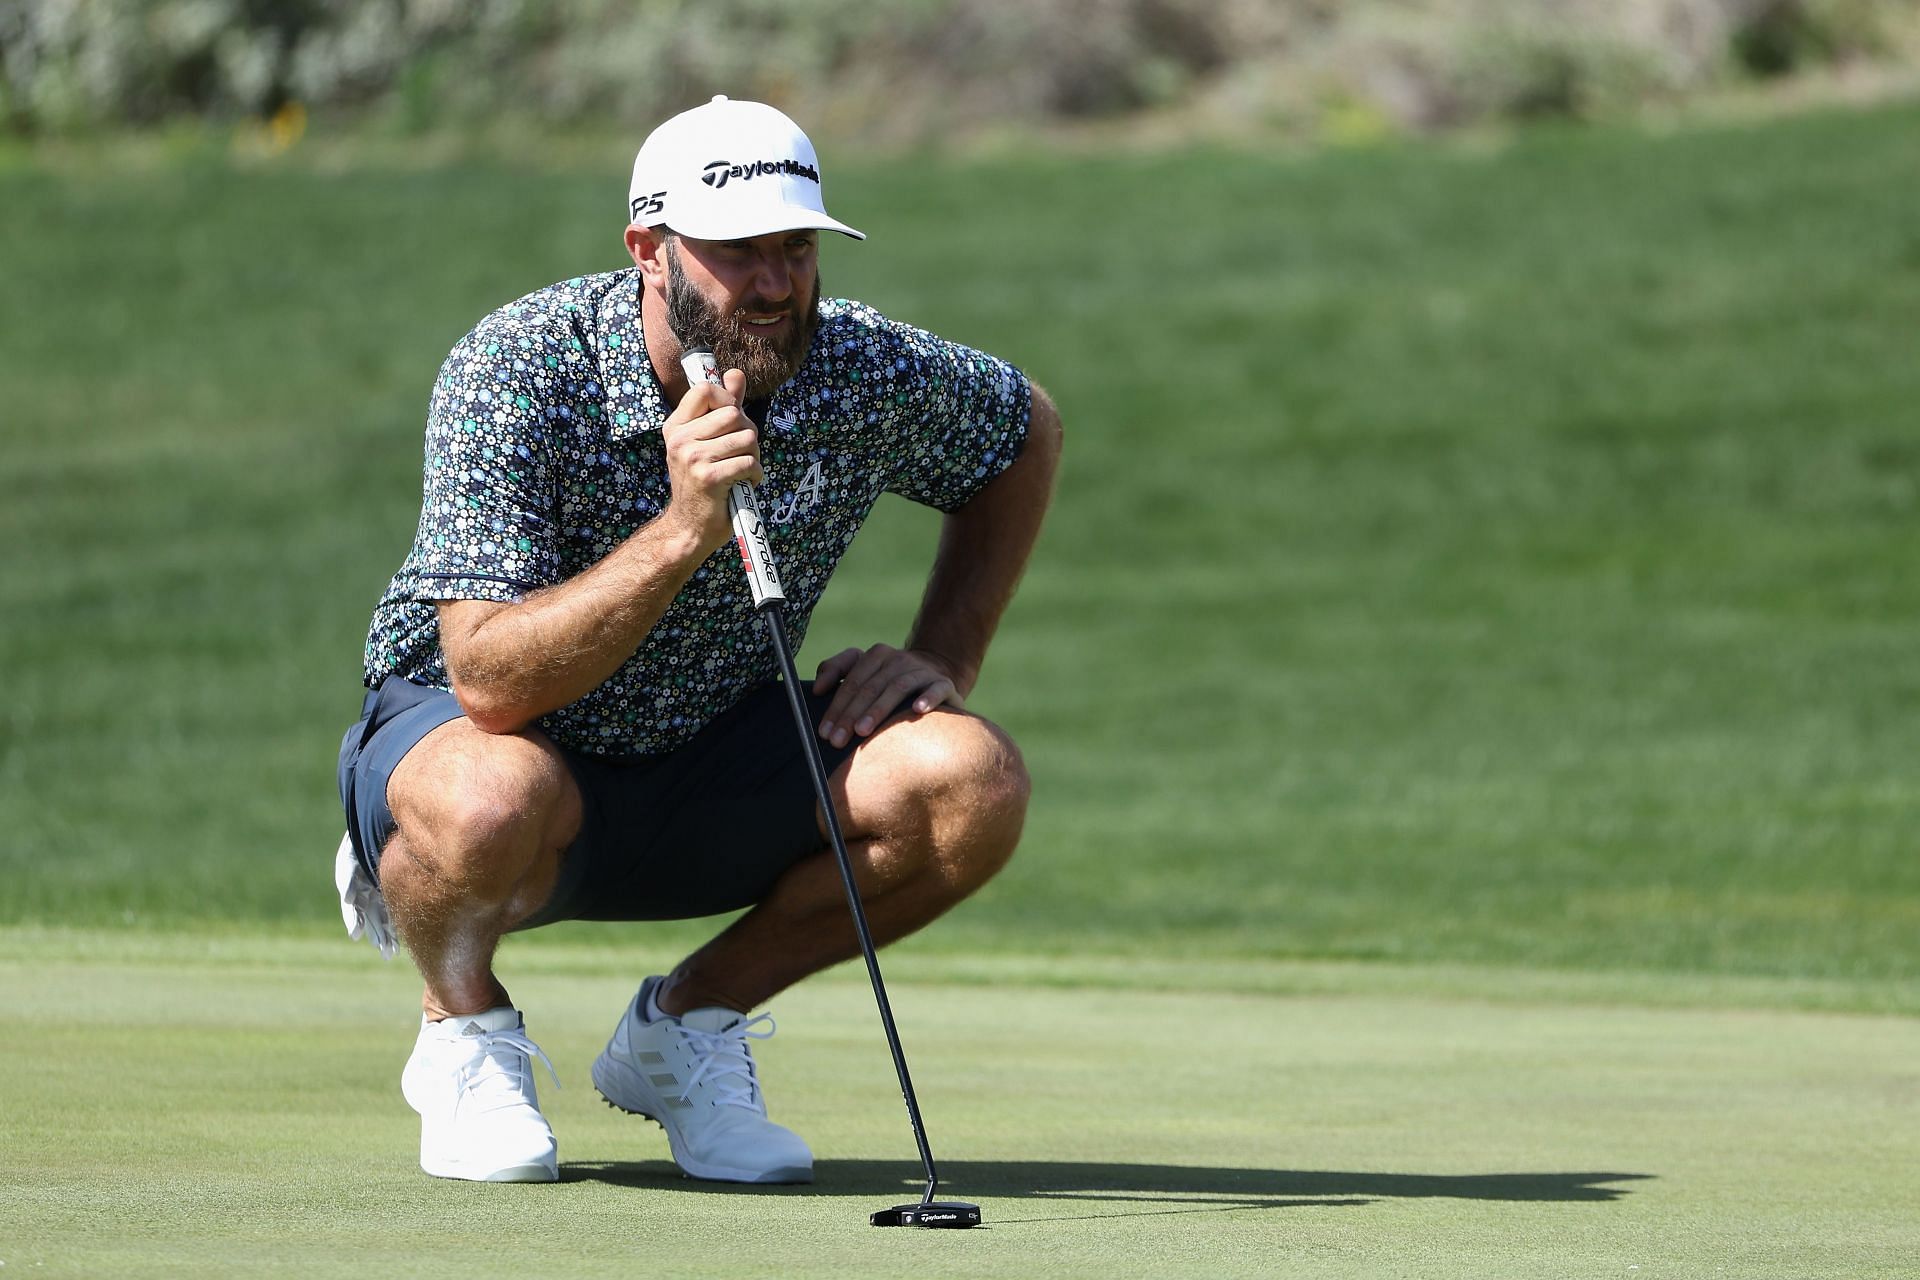 Does Dustin Johnson have a new sponsorship deal? LIV golfer spotted wearing FootJoy shoes split with Adidas